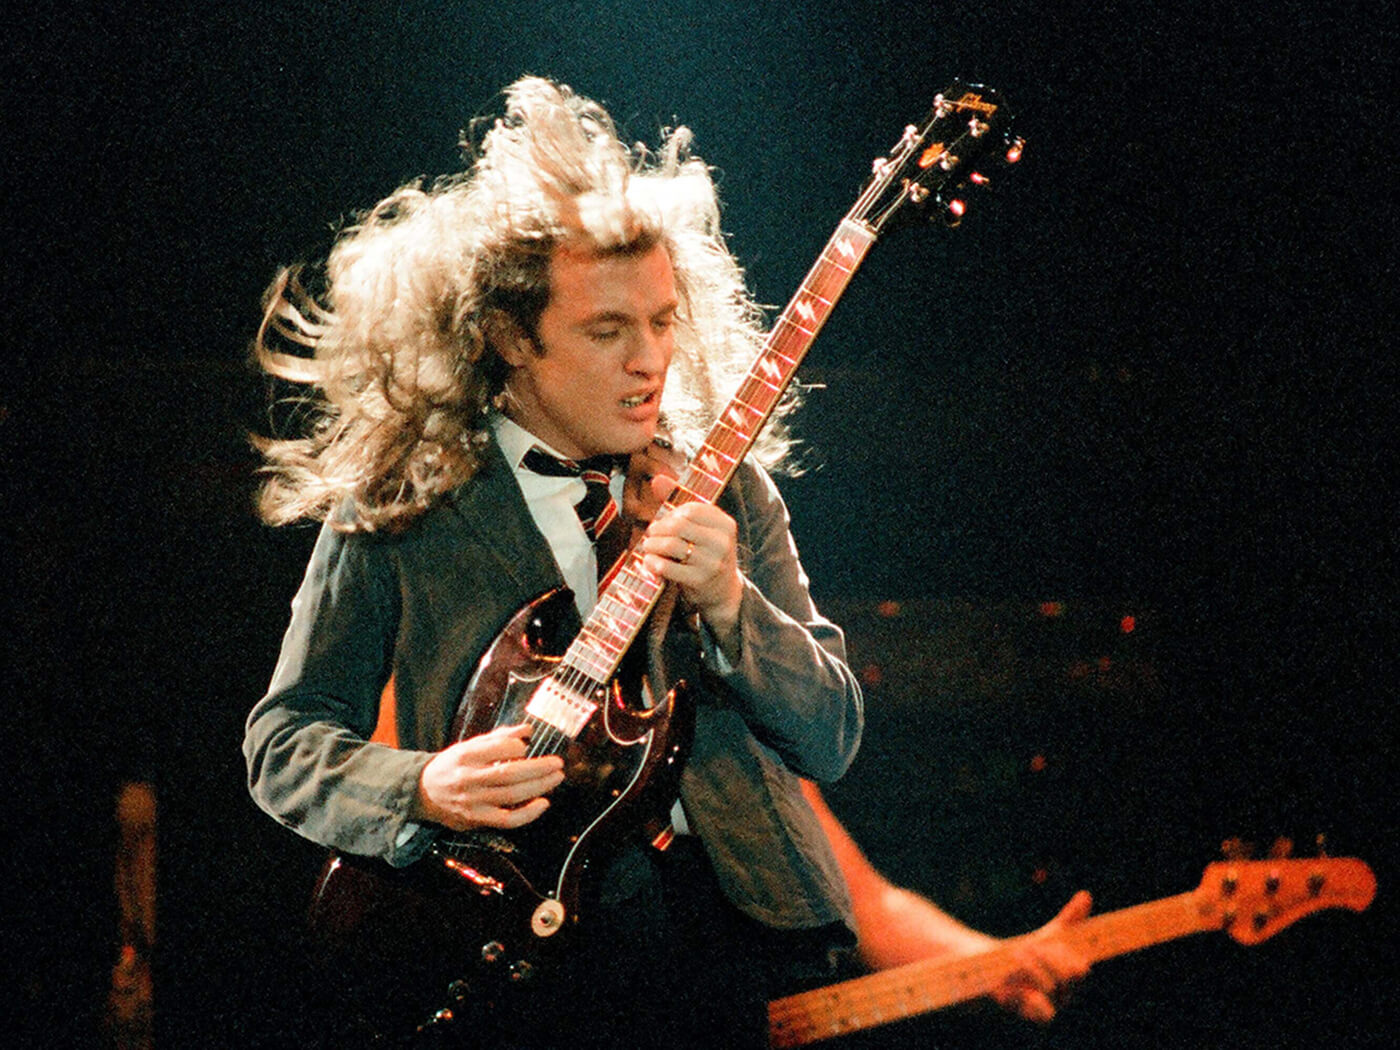 Angus Young of AC/DC performing in 1986 with a Gibson SG by Pete Still/Redferns via Getty Images